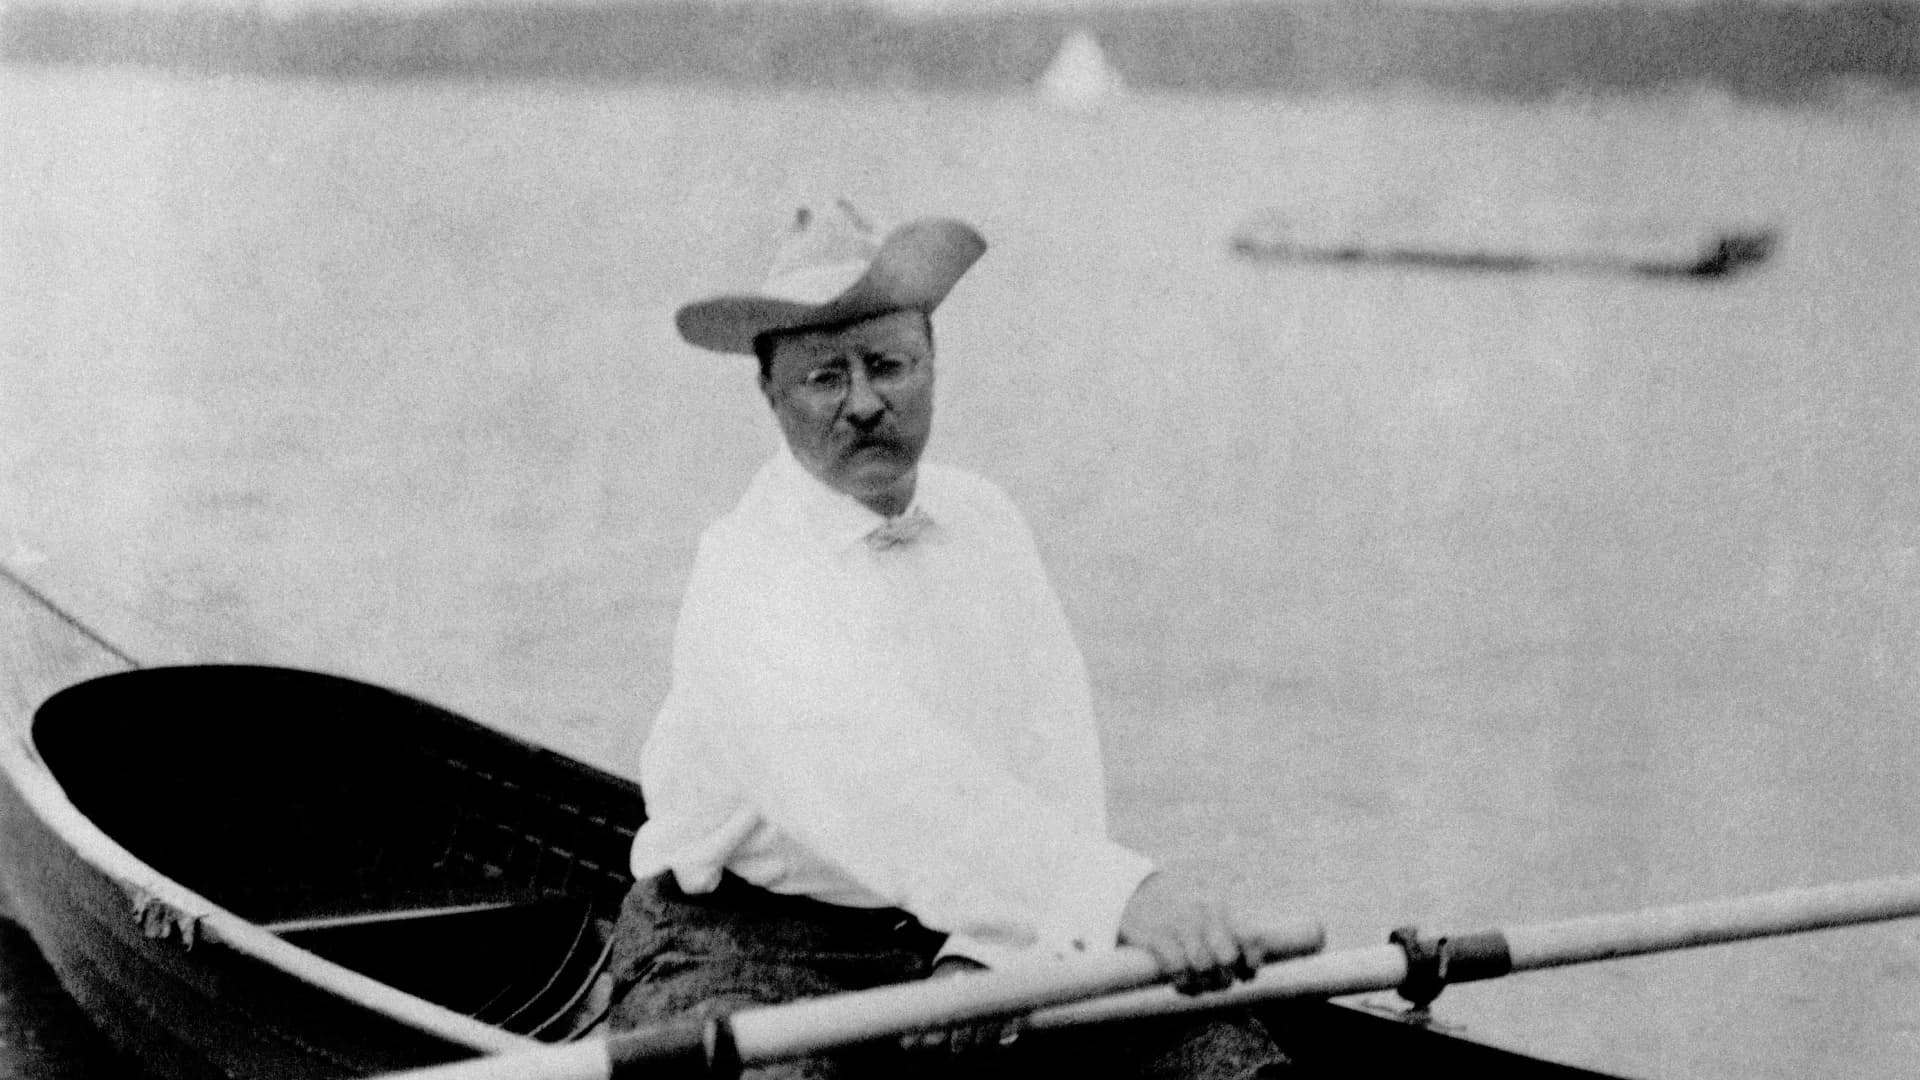 Dee-lighted: Enjoy a Teddy Roosevelt day in Oyster Bay